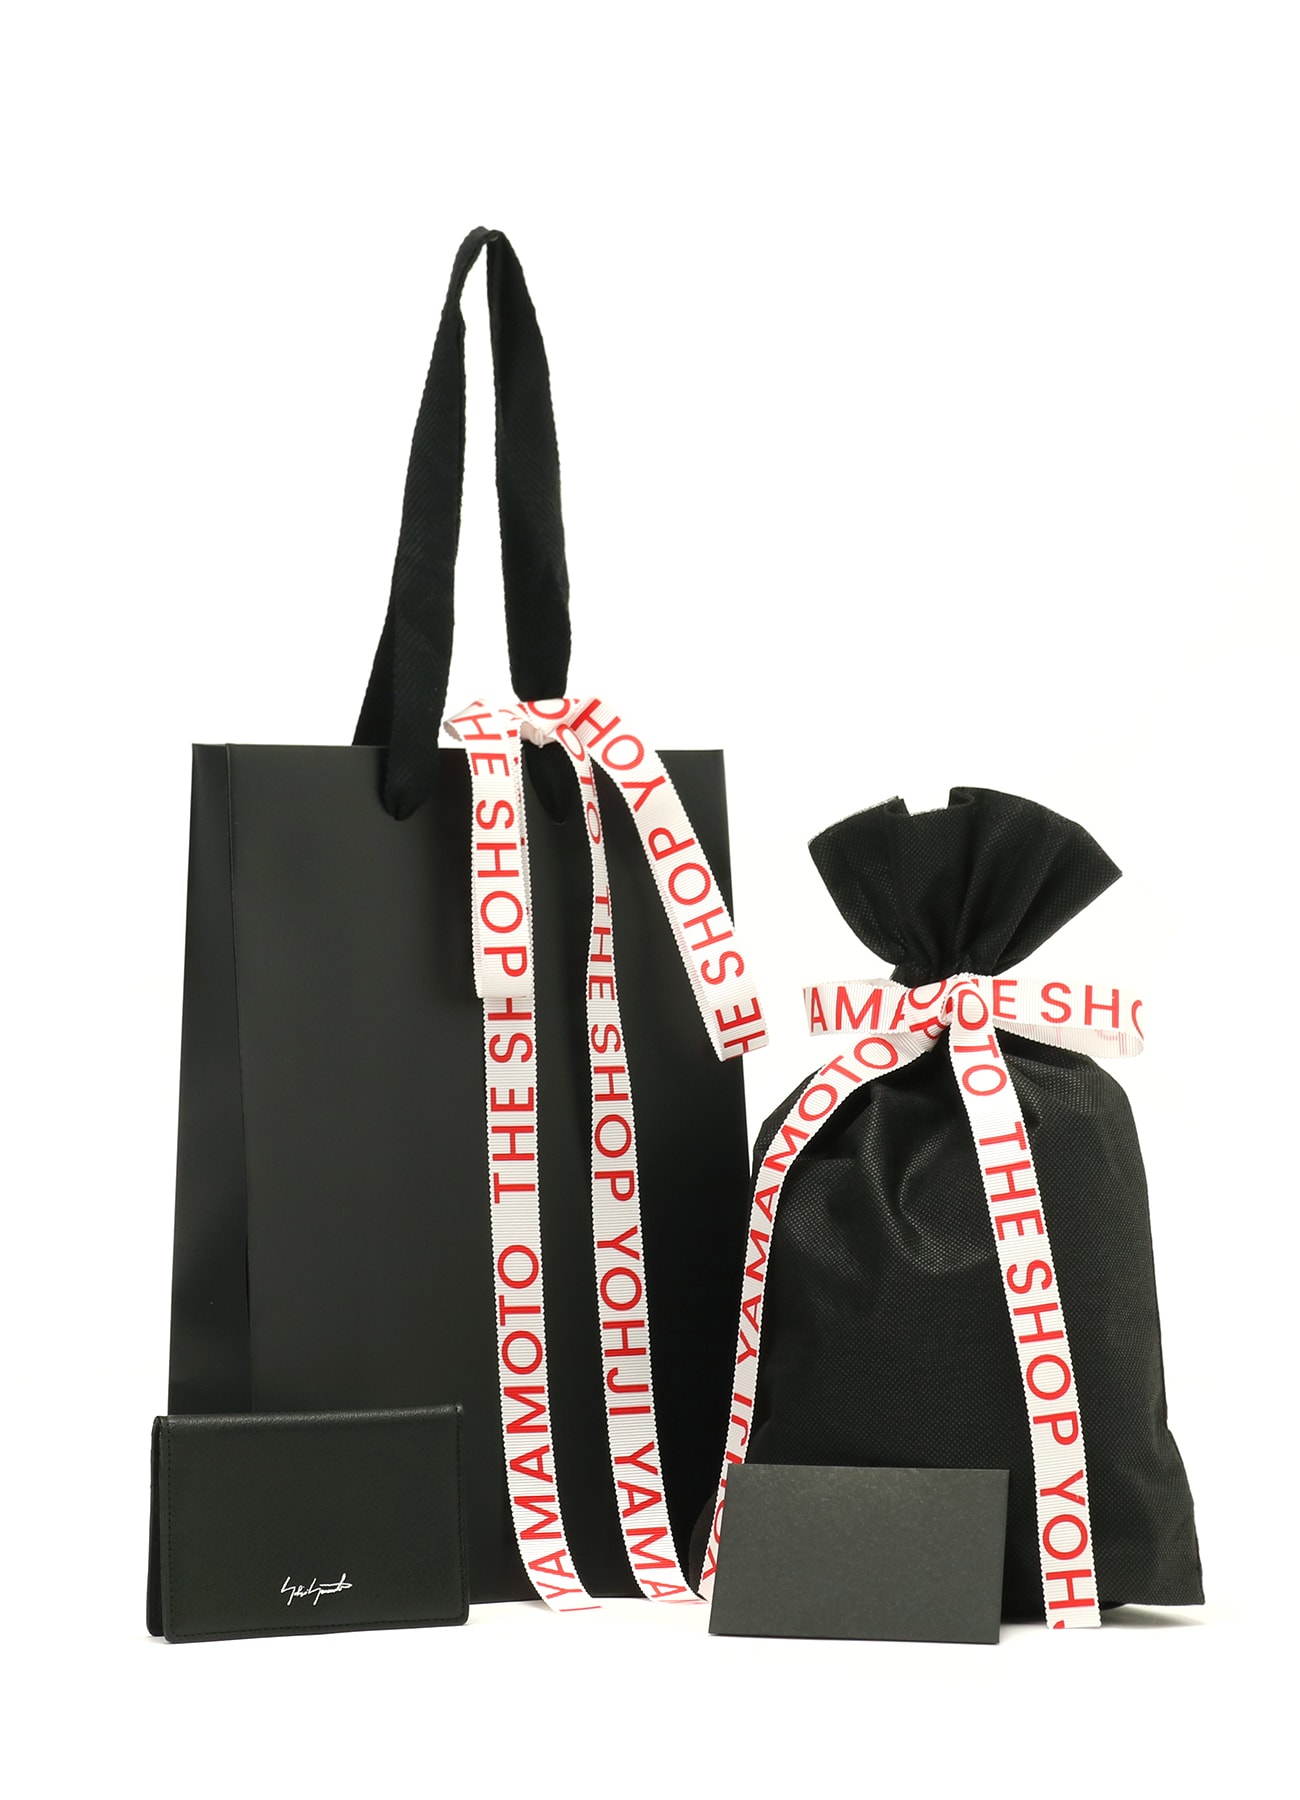 Self-wrap THE SHOP GIFT WRAPPING KIT (S) (WhitexRed)	